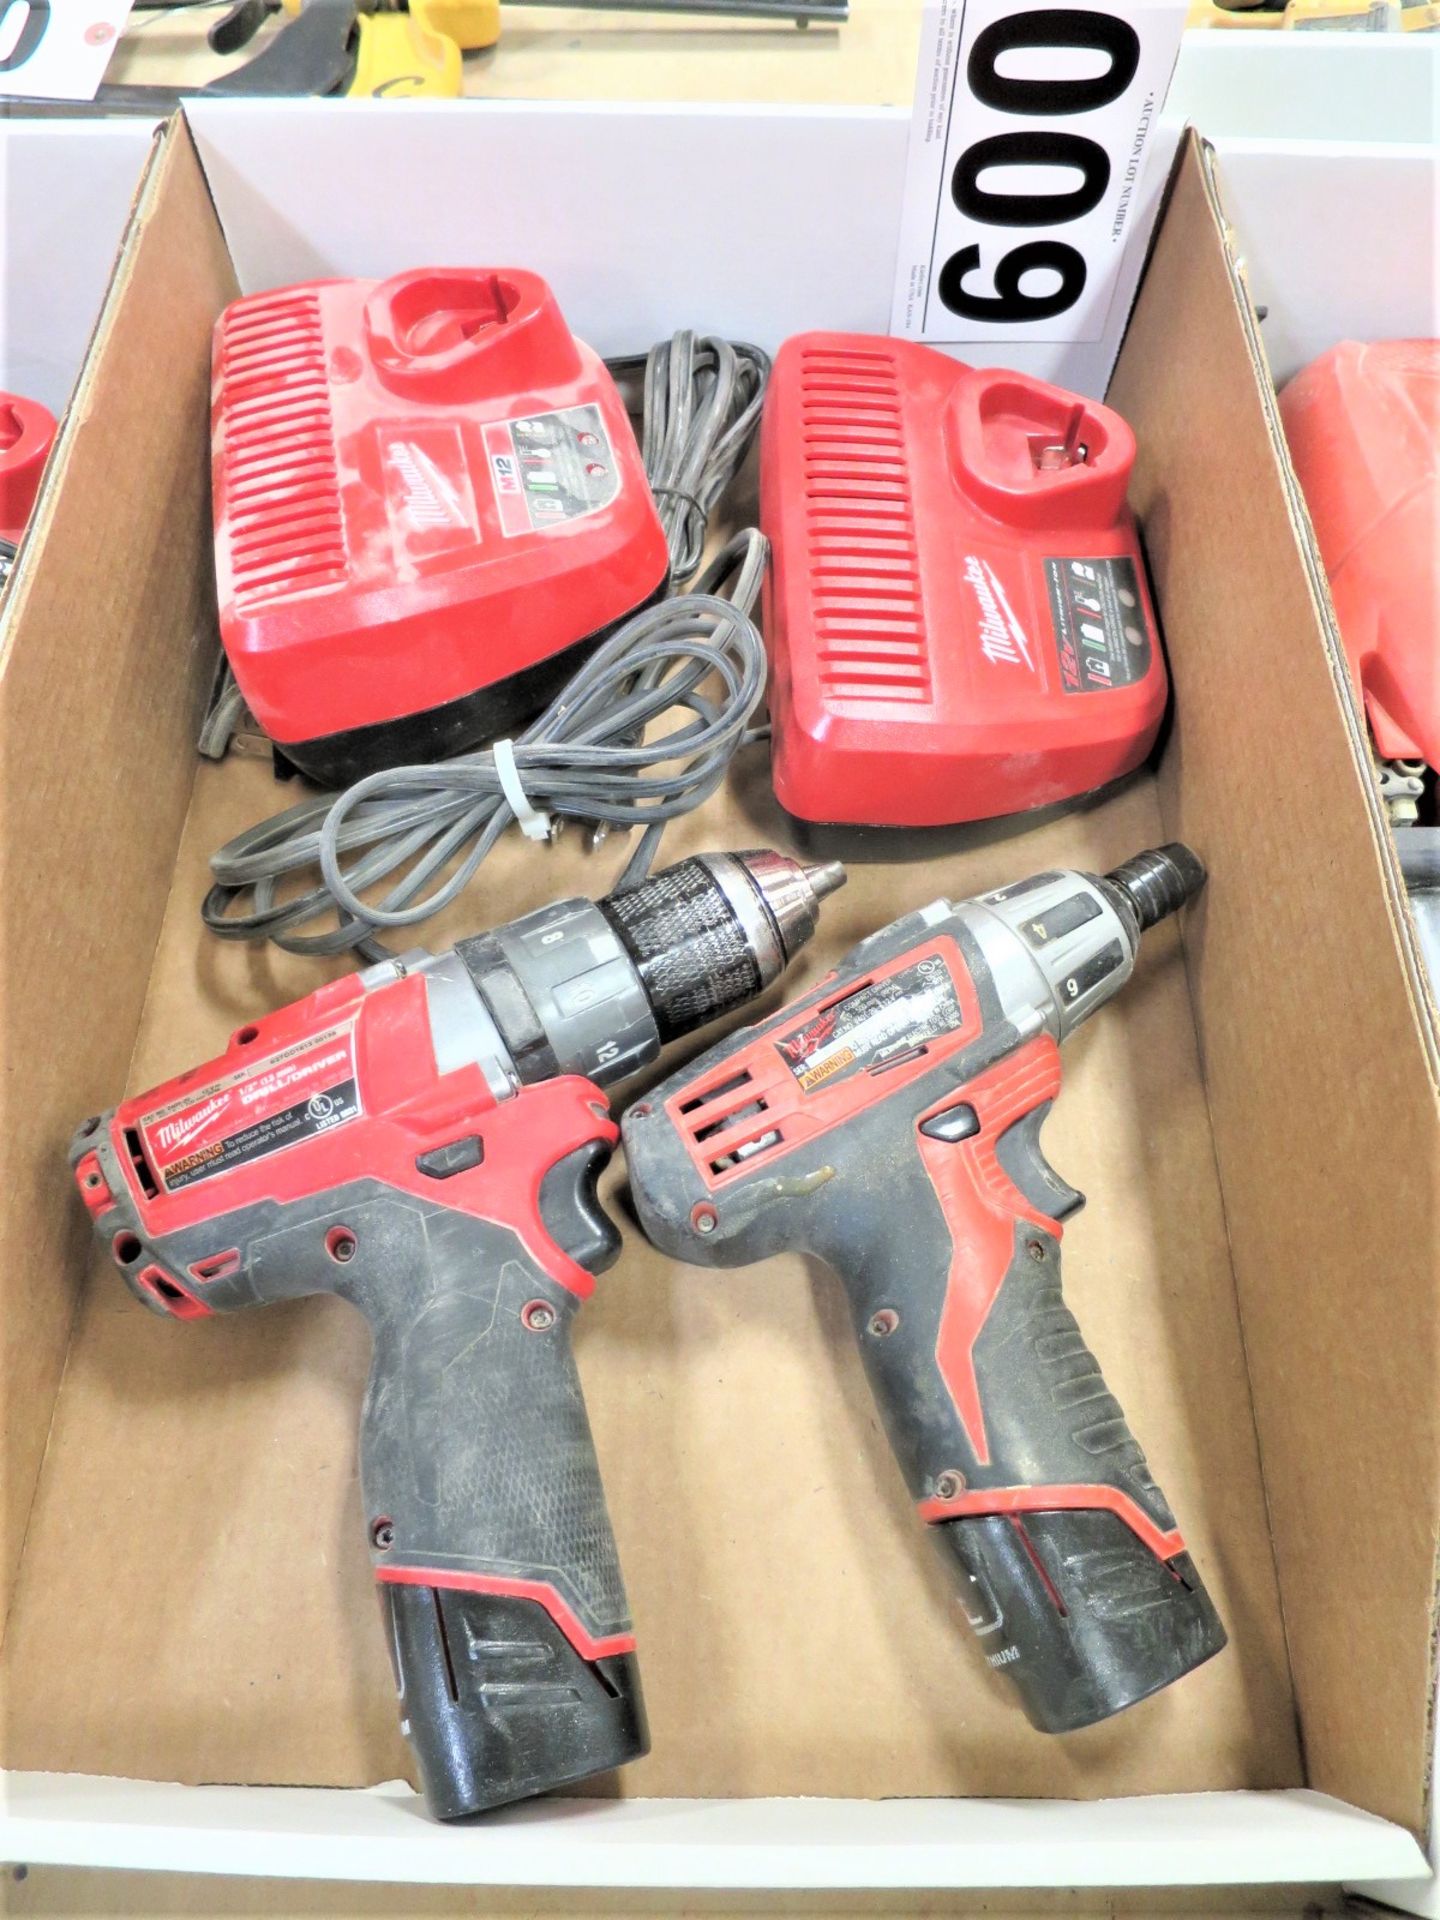 Milwaukee 1/2" Drill and Company Driver with Chargers